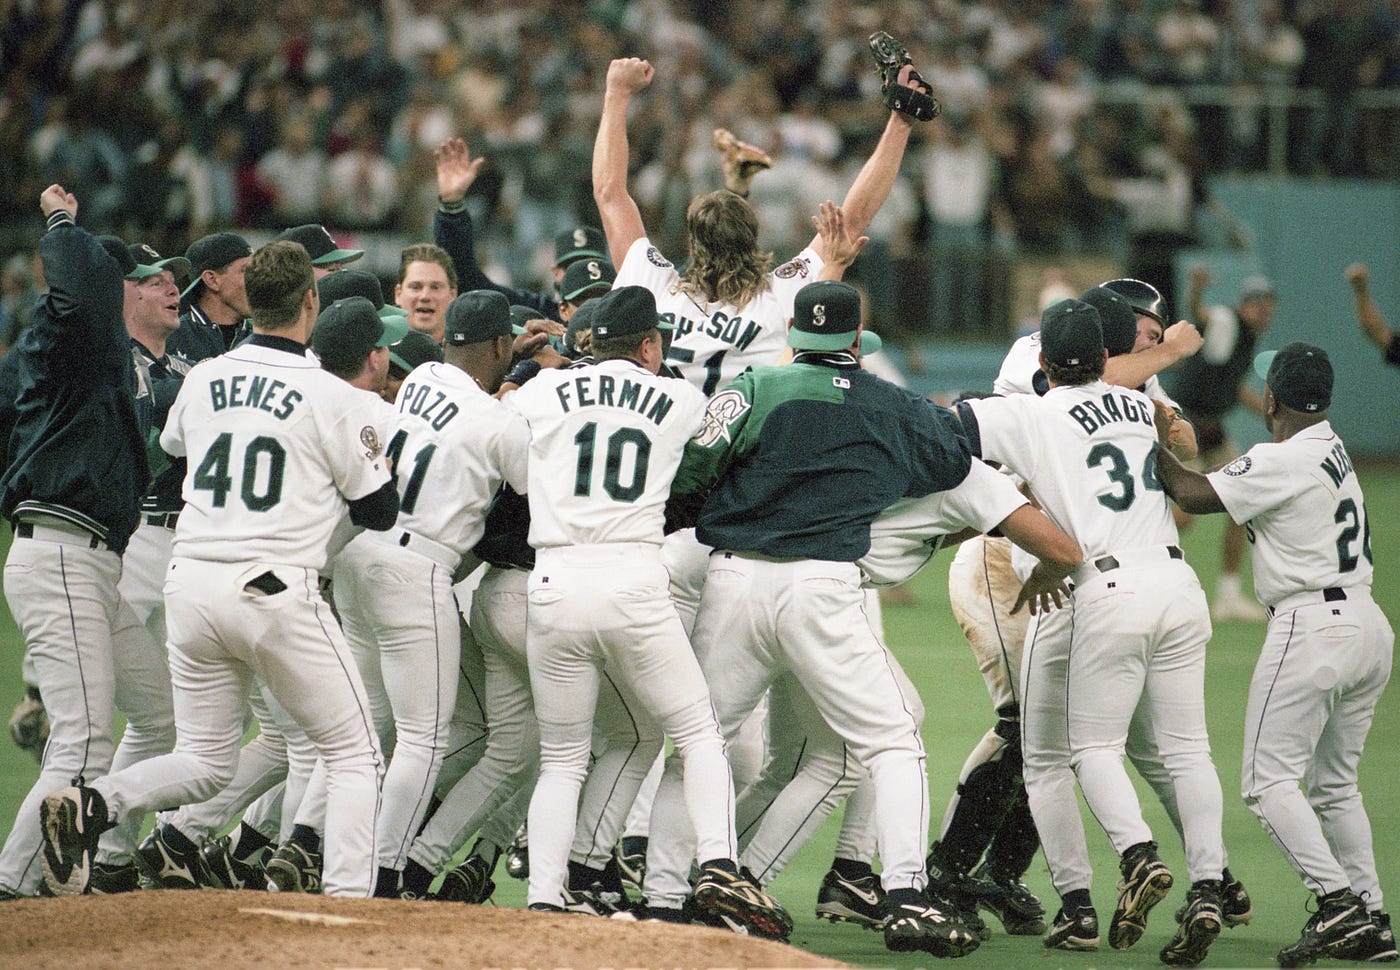 Classic Mariners Games: One-Game Playoff in 1995, by Mariners PR